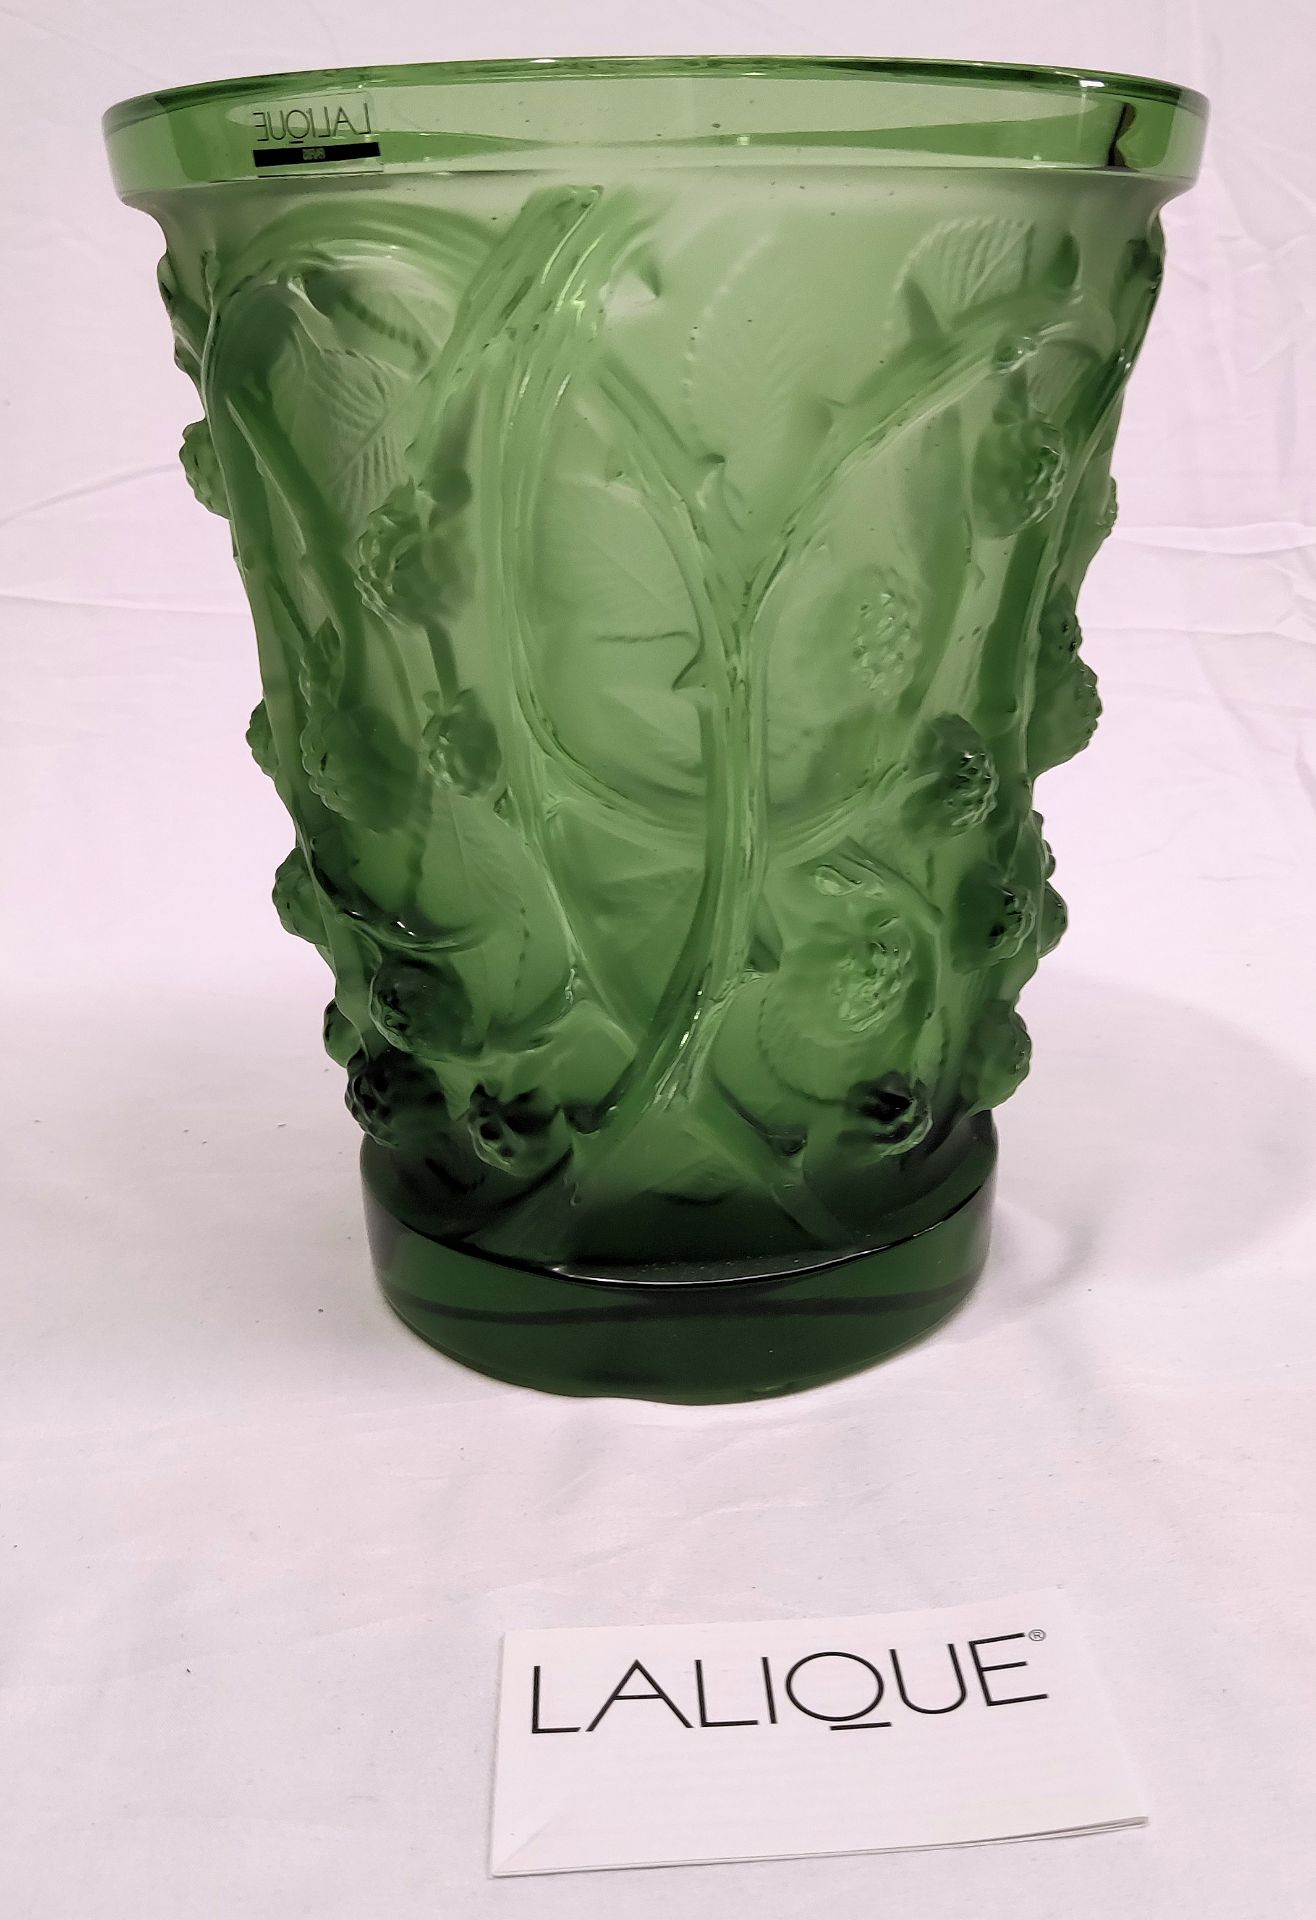 1 x LALIQUE 'Mures' Exquisite Handcrafted French Green Crystal Medium Vase - Original RRP £2,690 - Image 2 of 23